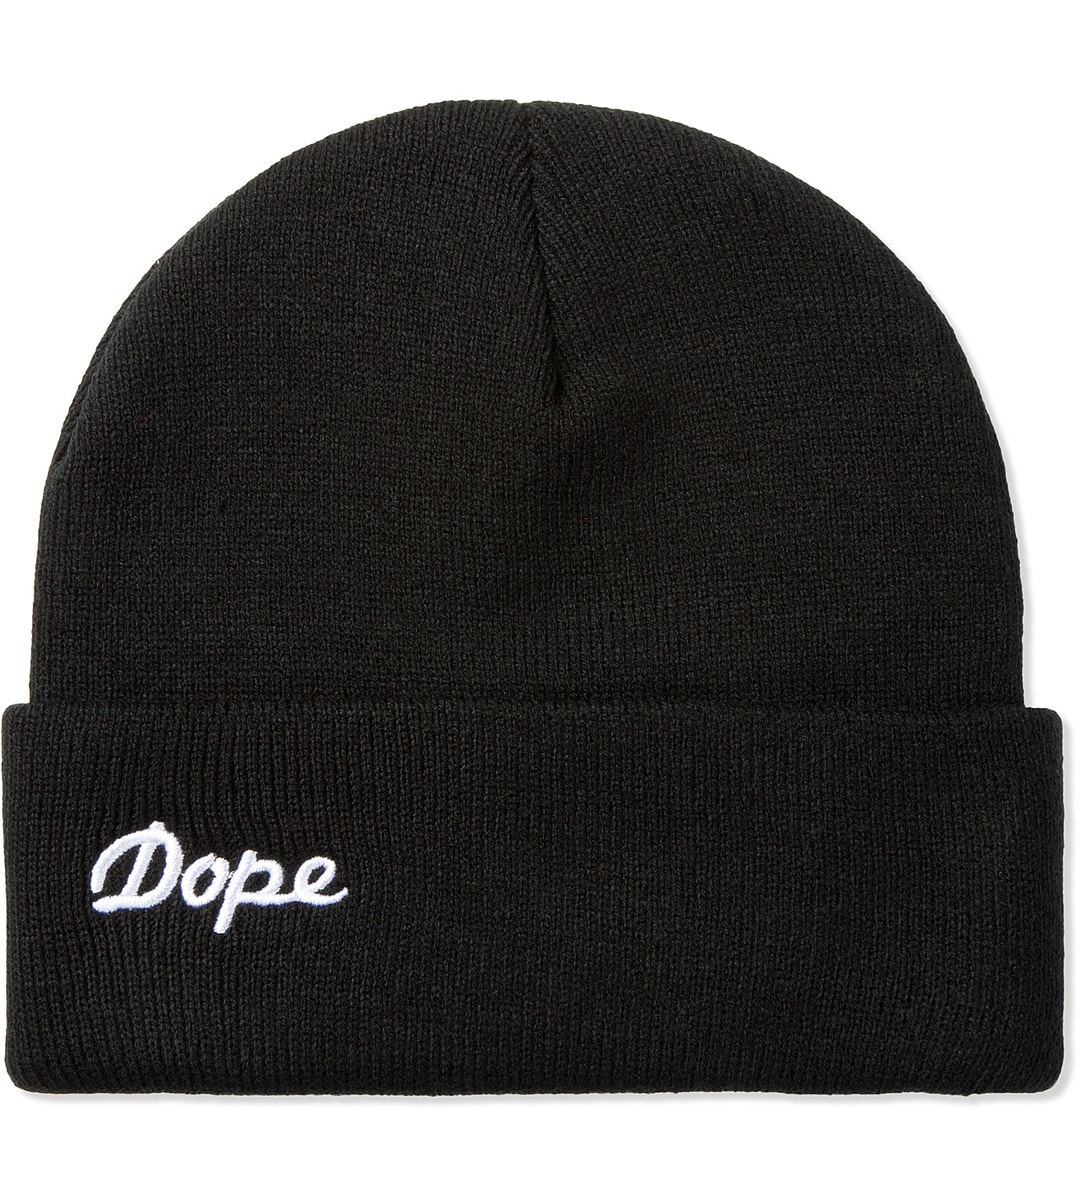 Stampd - Dope Beanie | HBX - Globally Curated Fashion and Lifestyle by ...